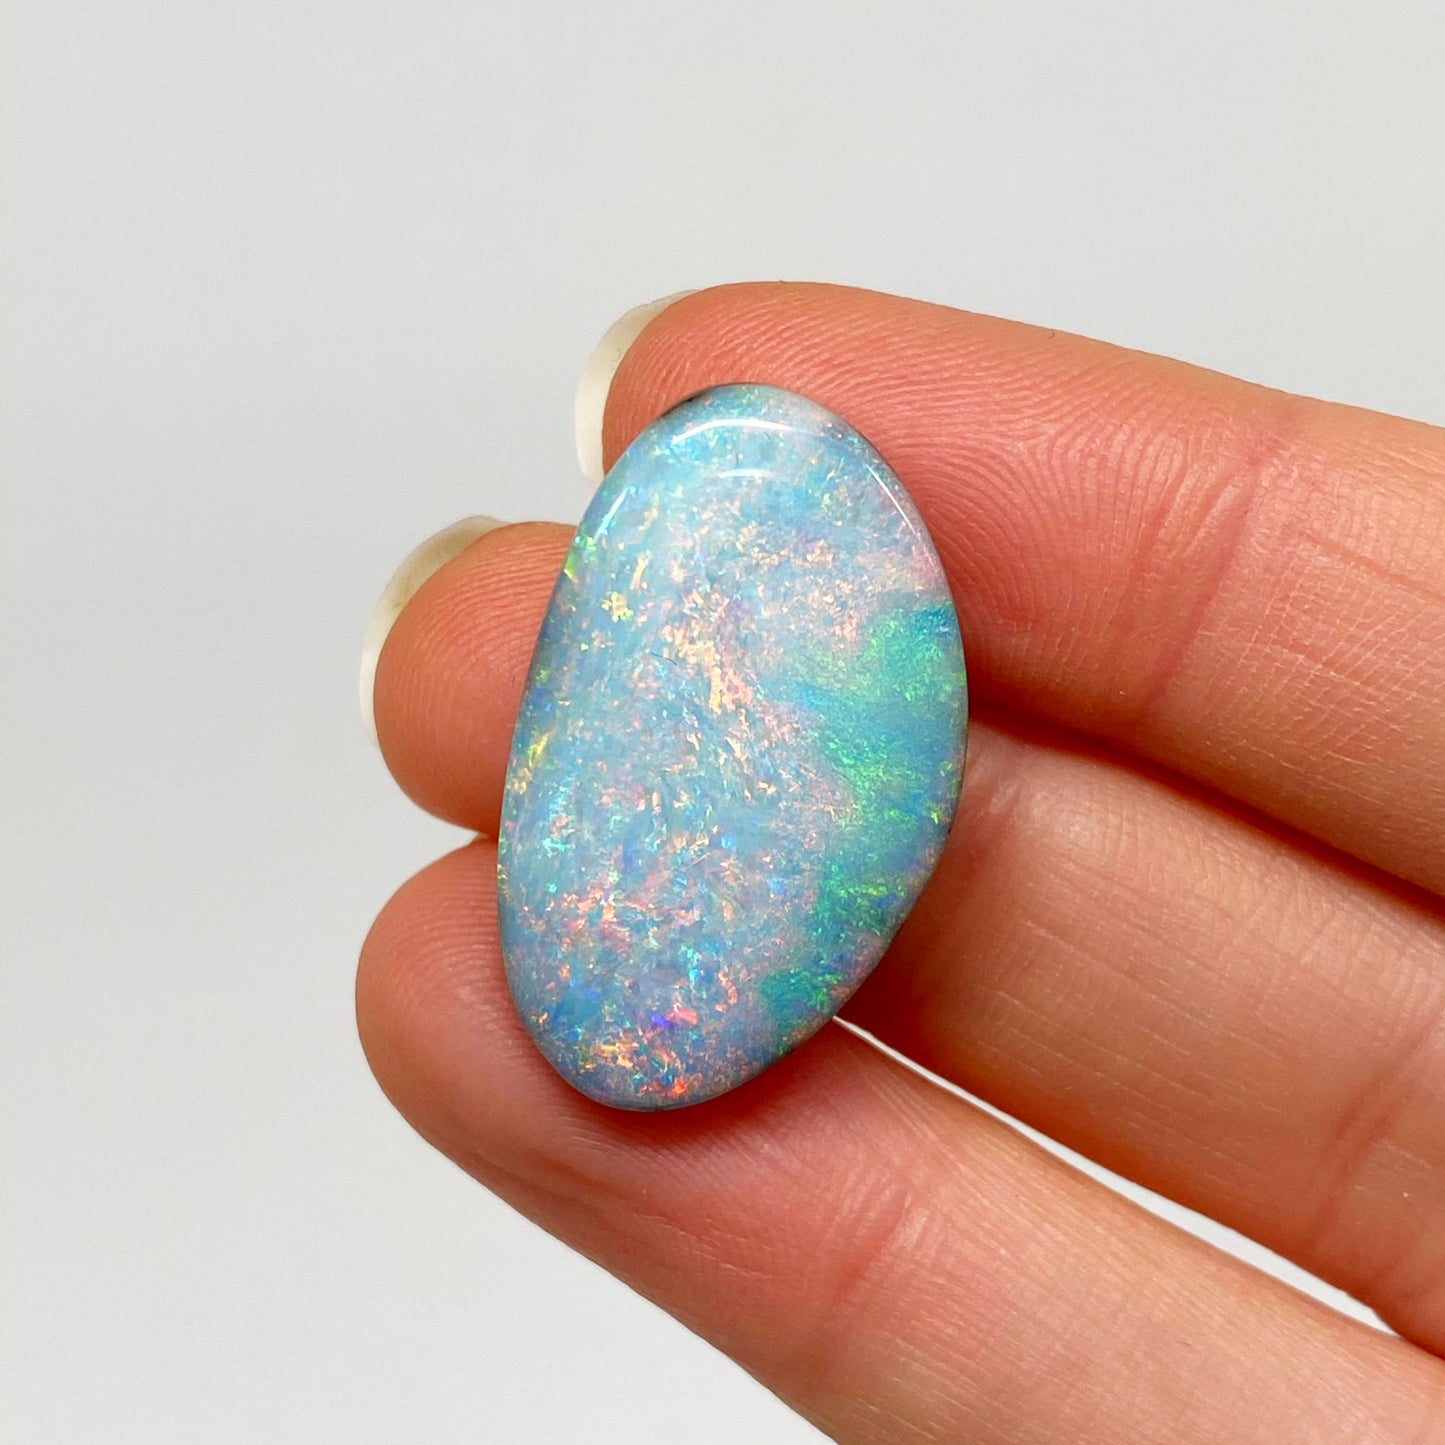 25.92 Ct large pink and turquoise boulder opal